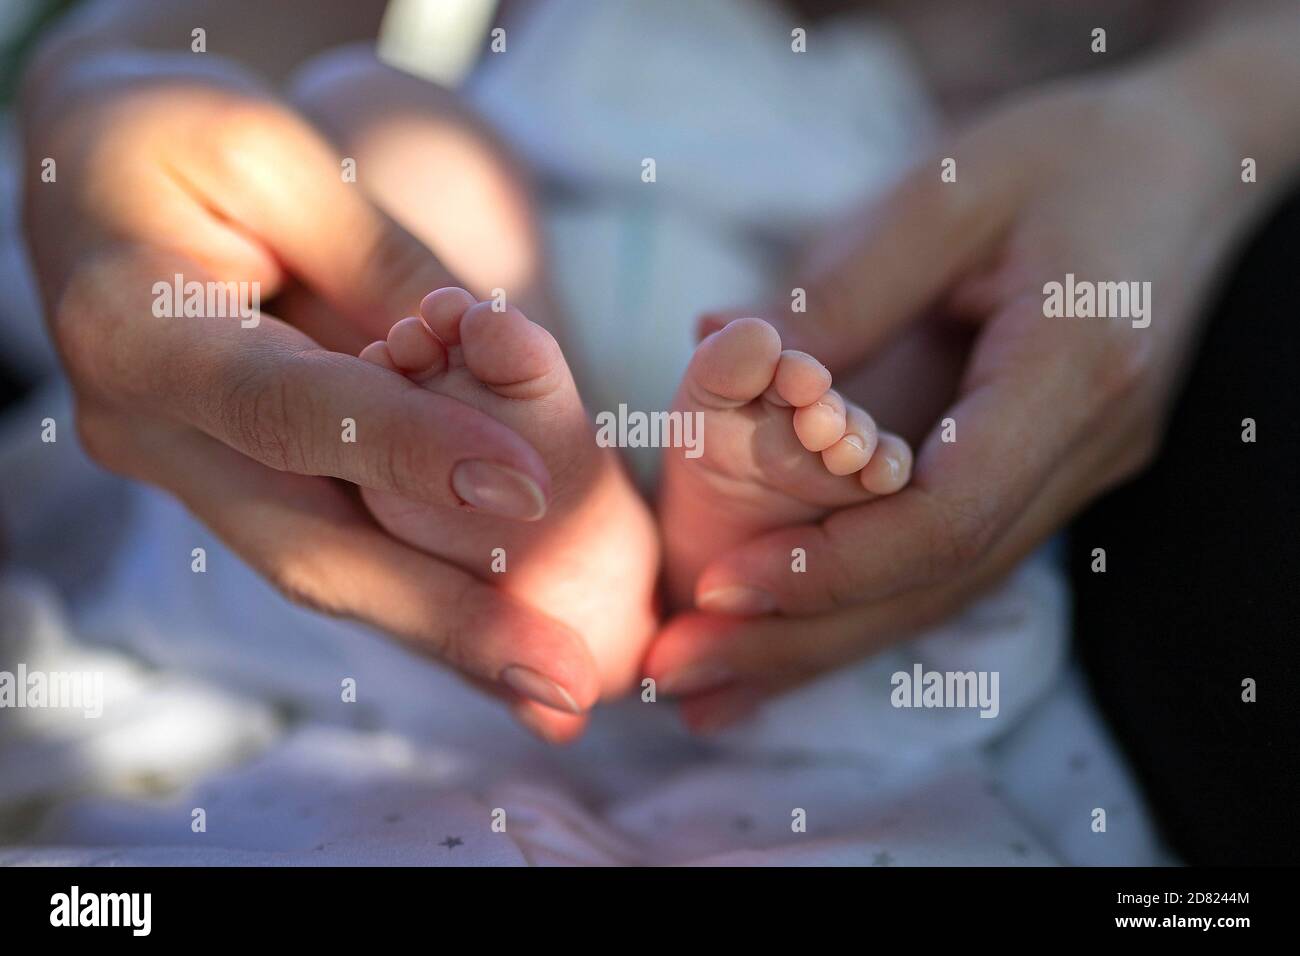 Baby Foot In Mother's Careful Hands Stock Photo, Picture and Royalty Free  Image. Image 34998832.